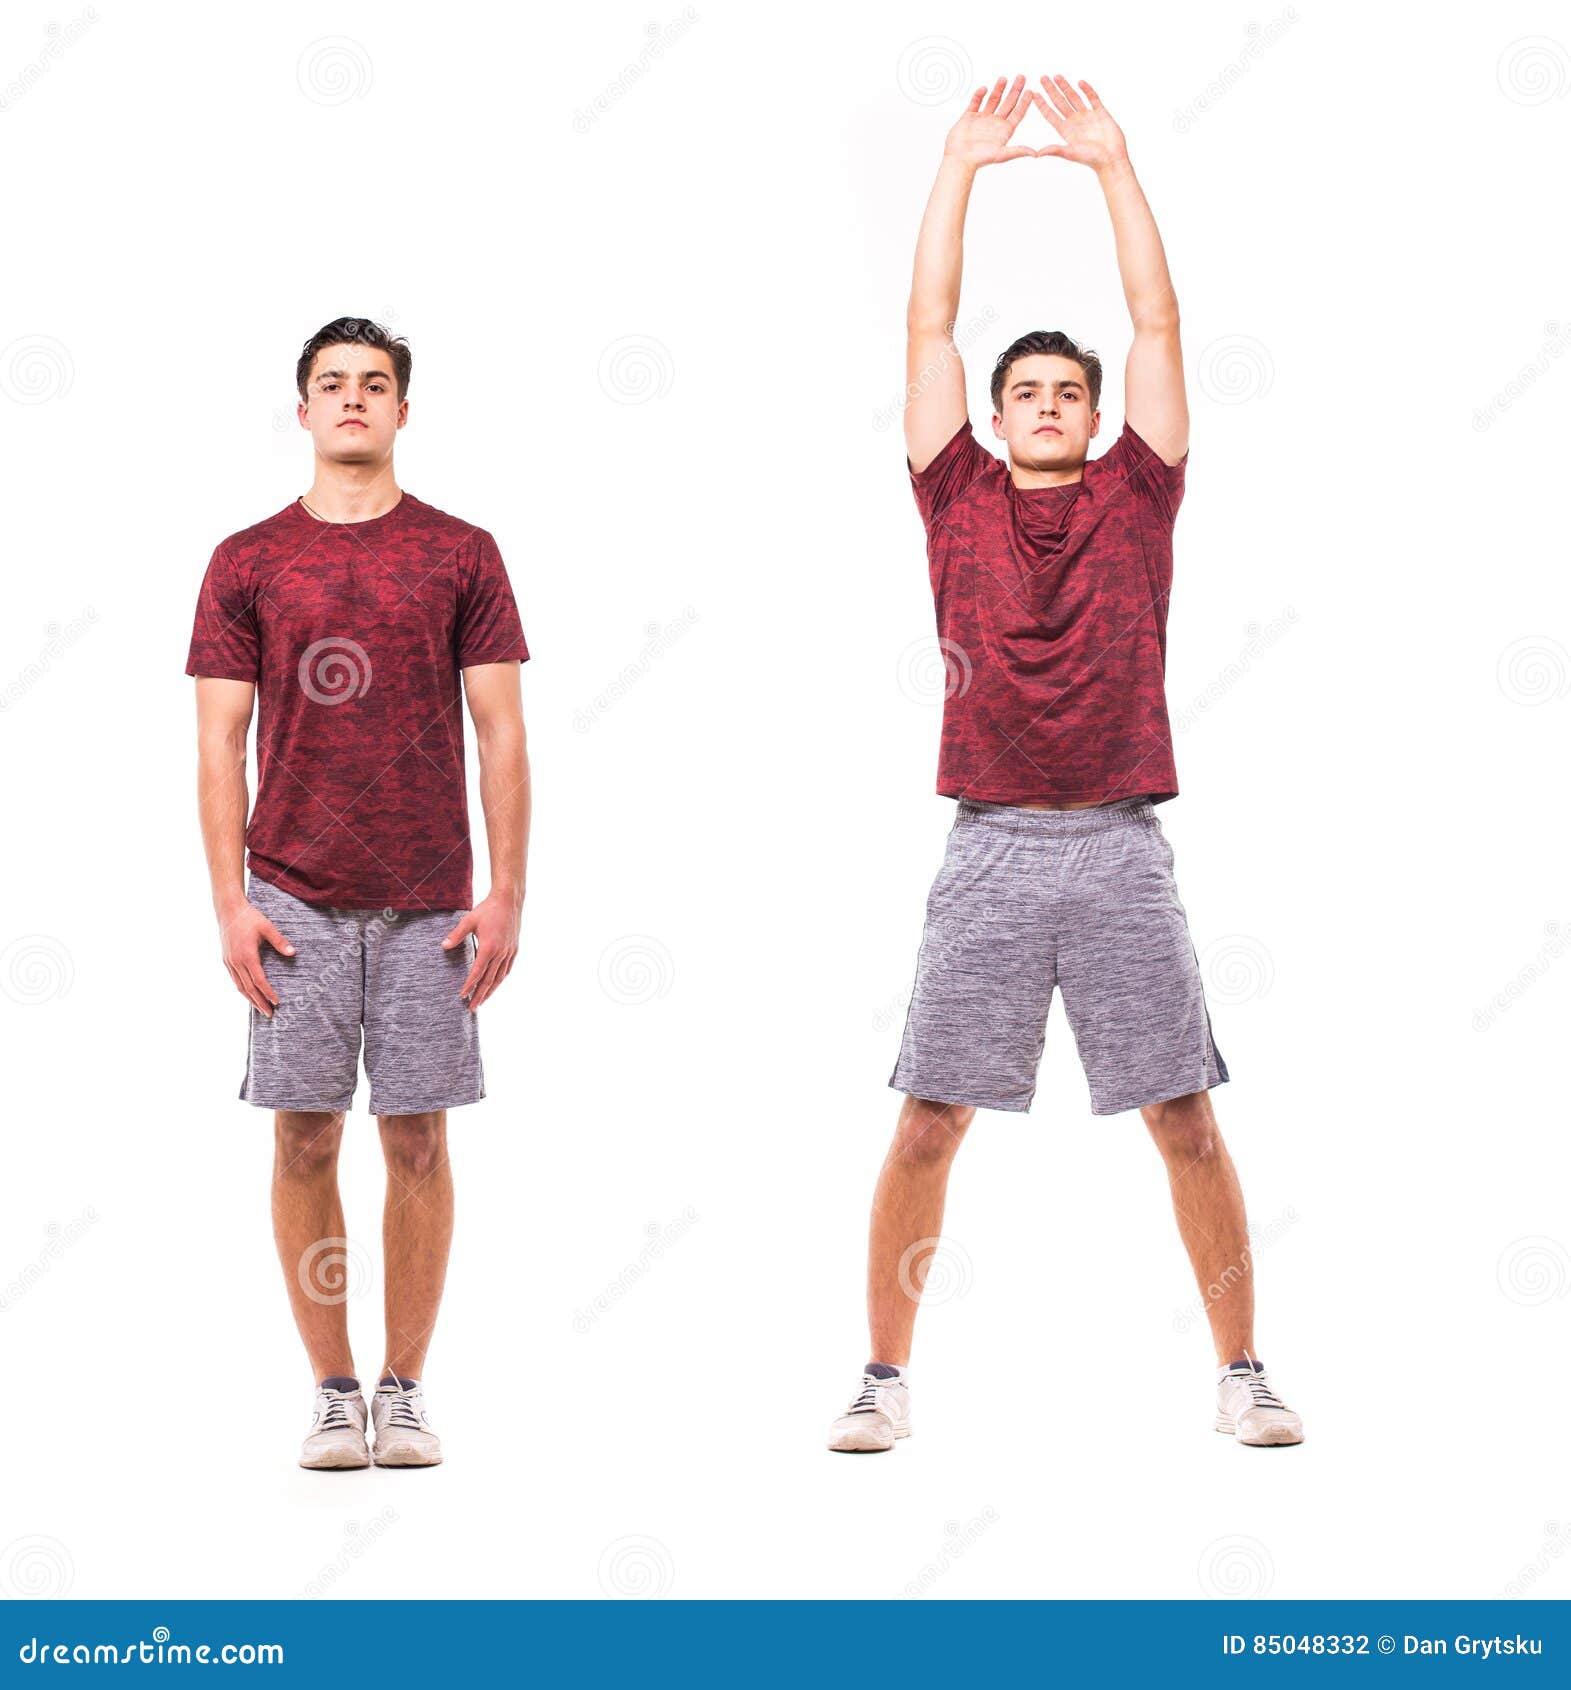 jumping jacks. young man doing sport exercise.